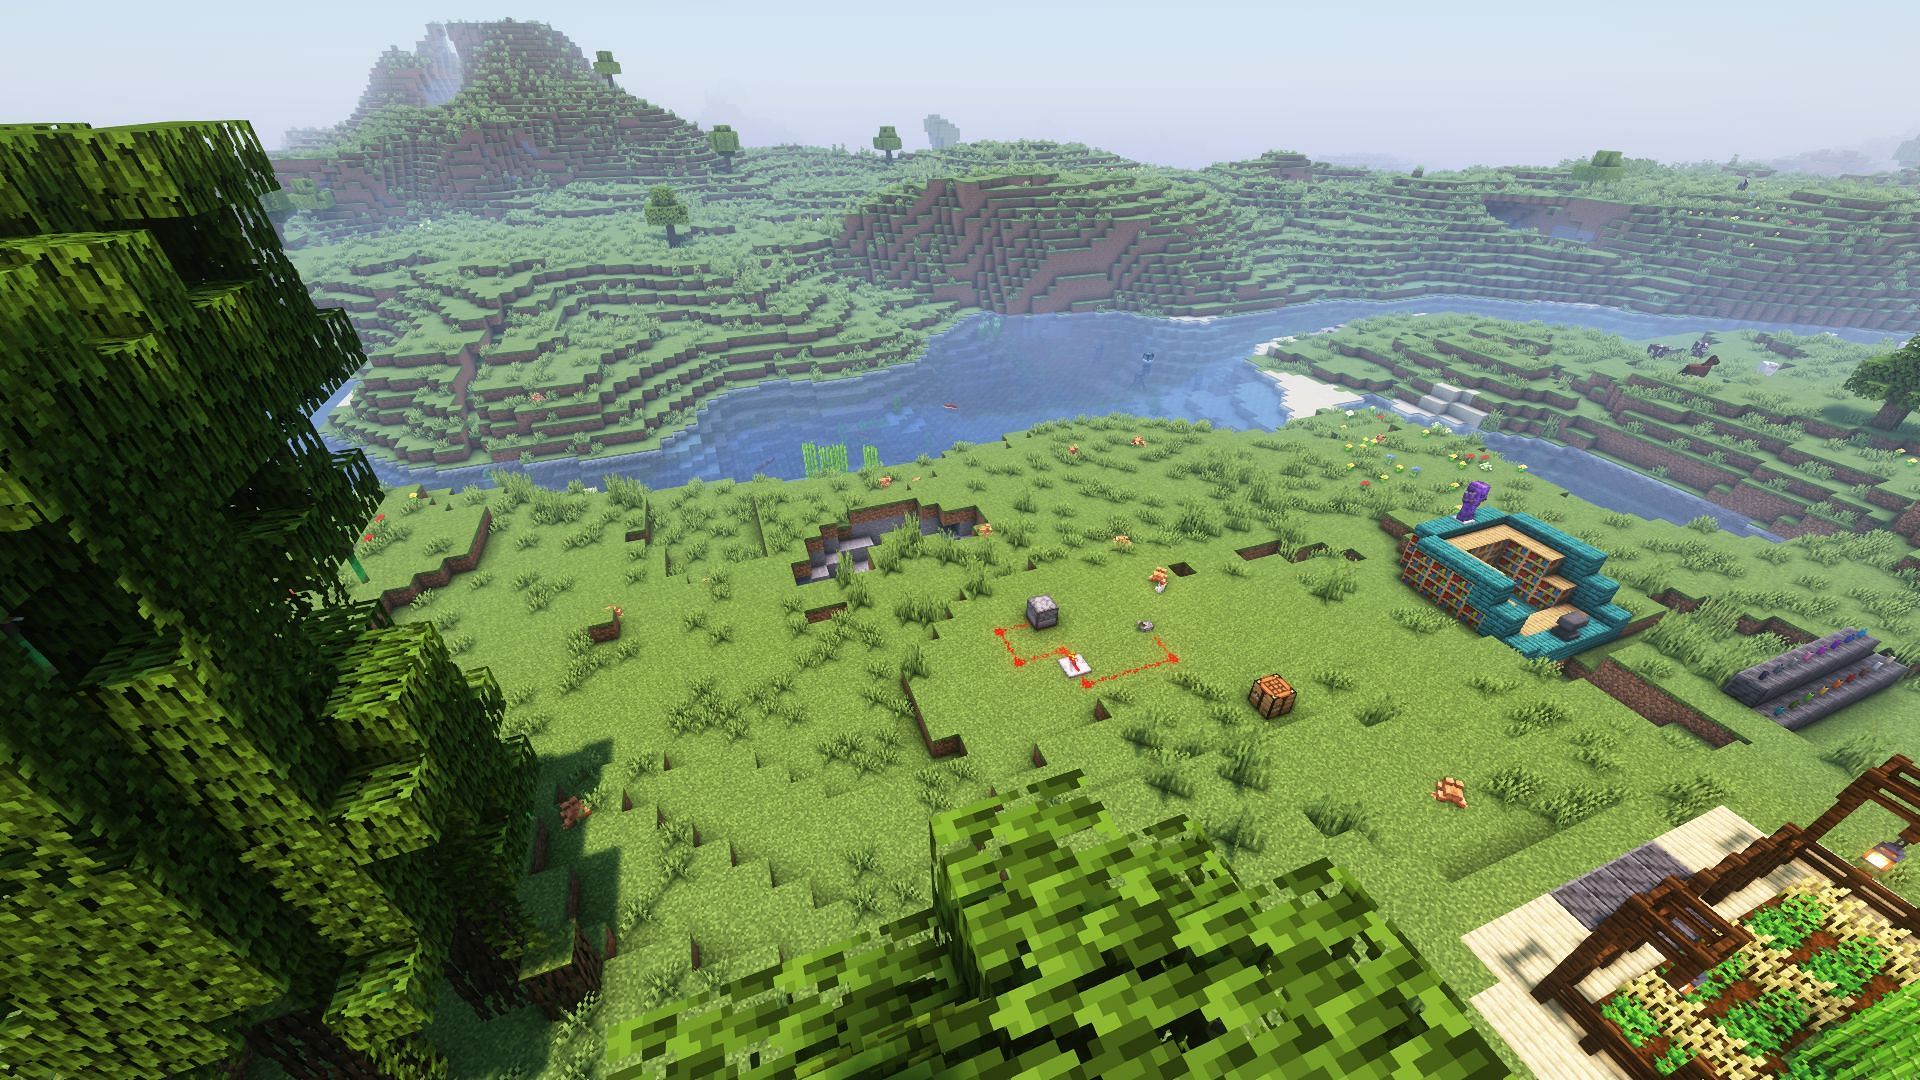 The example area with Complimentary Reimagined shaders applied (Image via Minecraft)